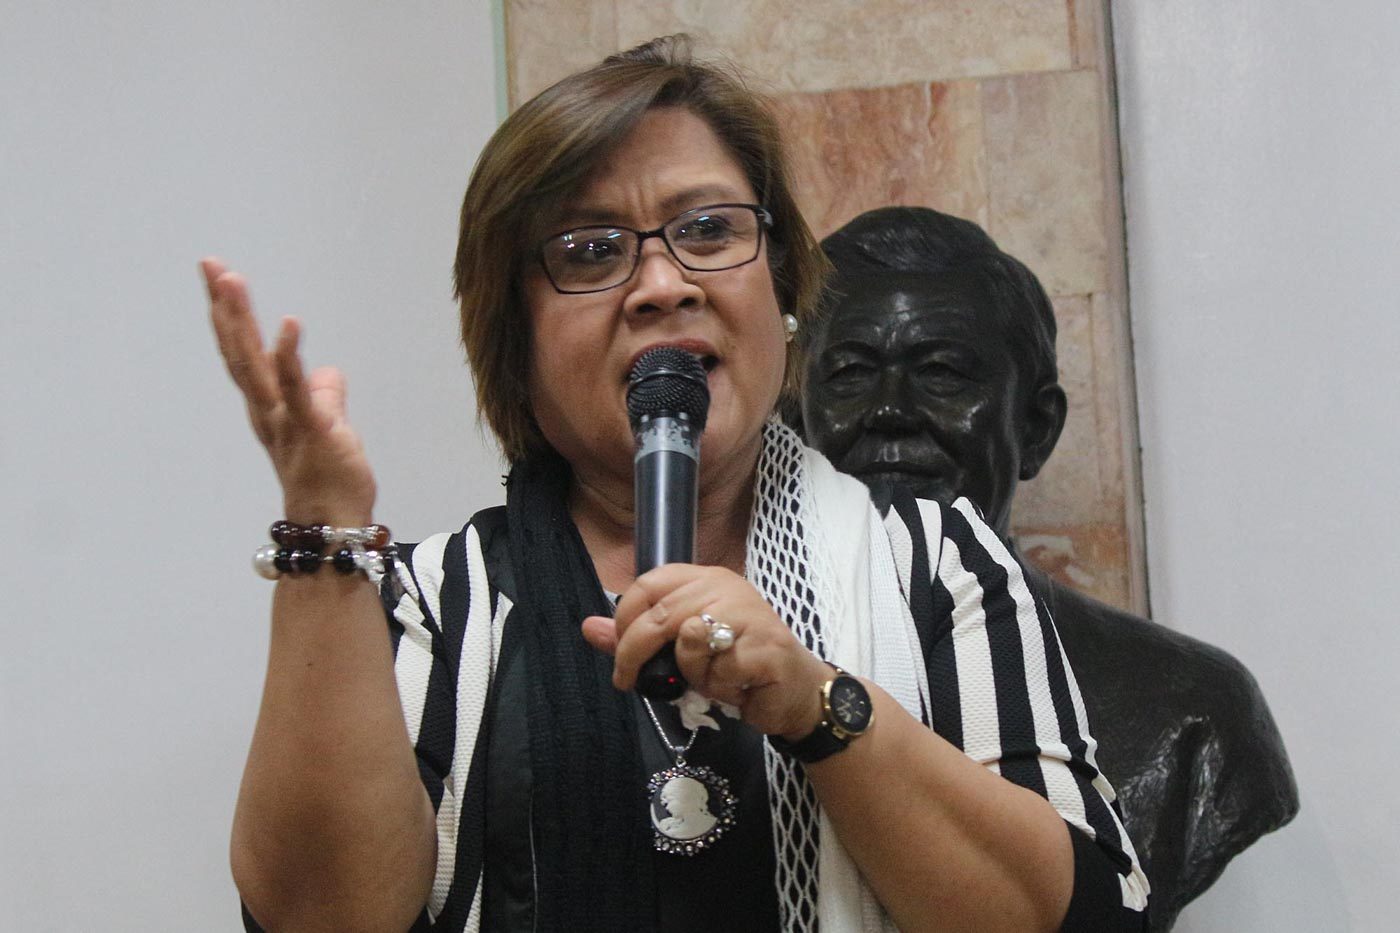 De Lima ‘revolted’ by ‘sex video’ talk at House probe